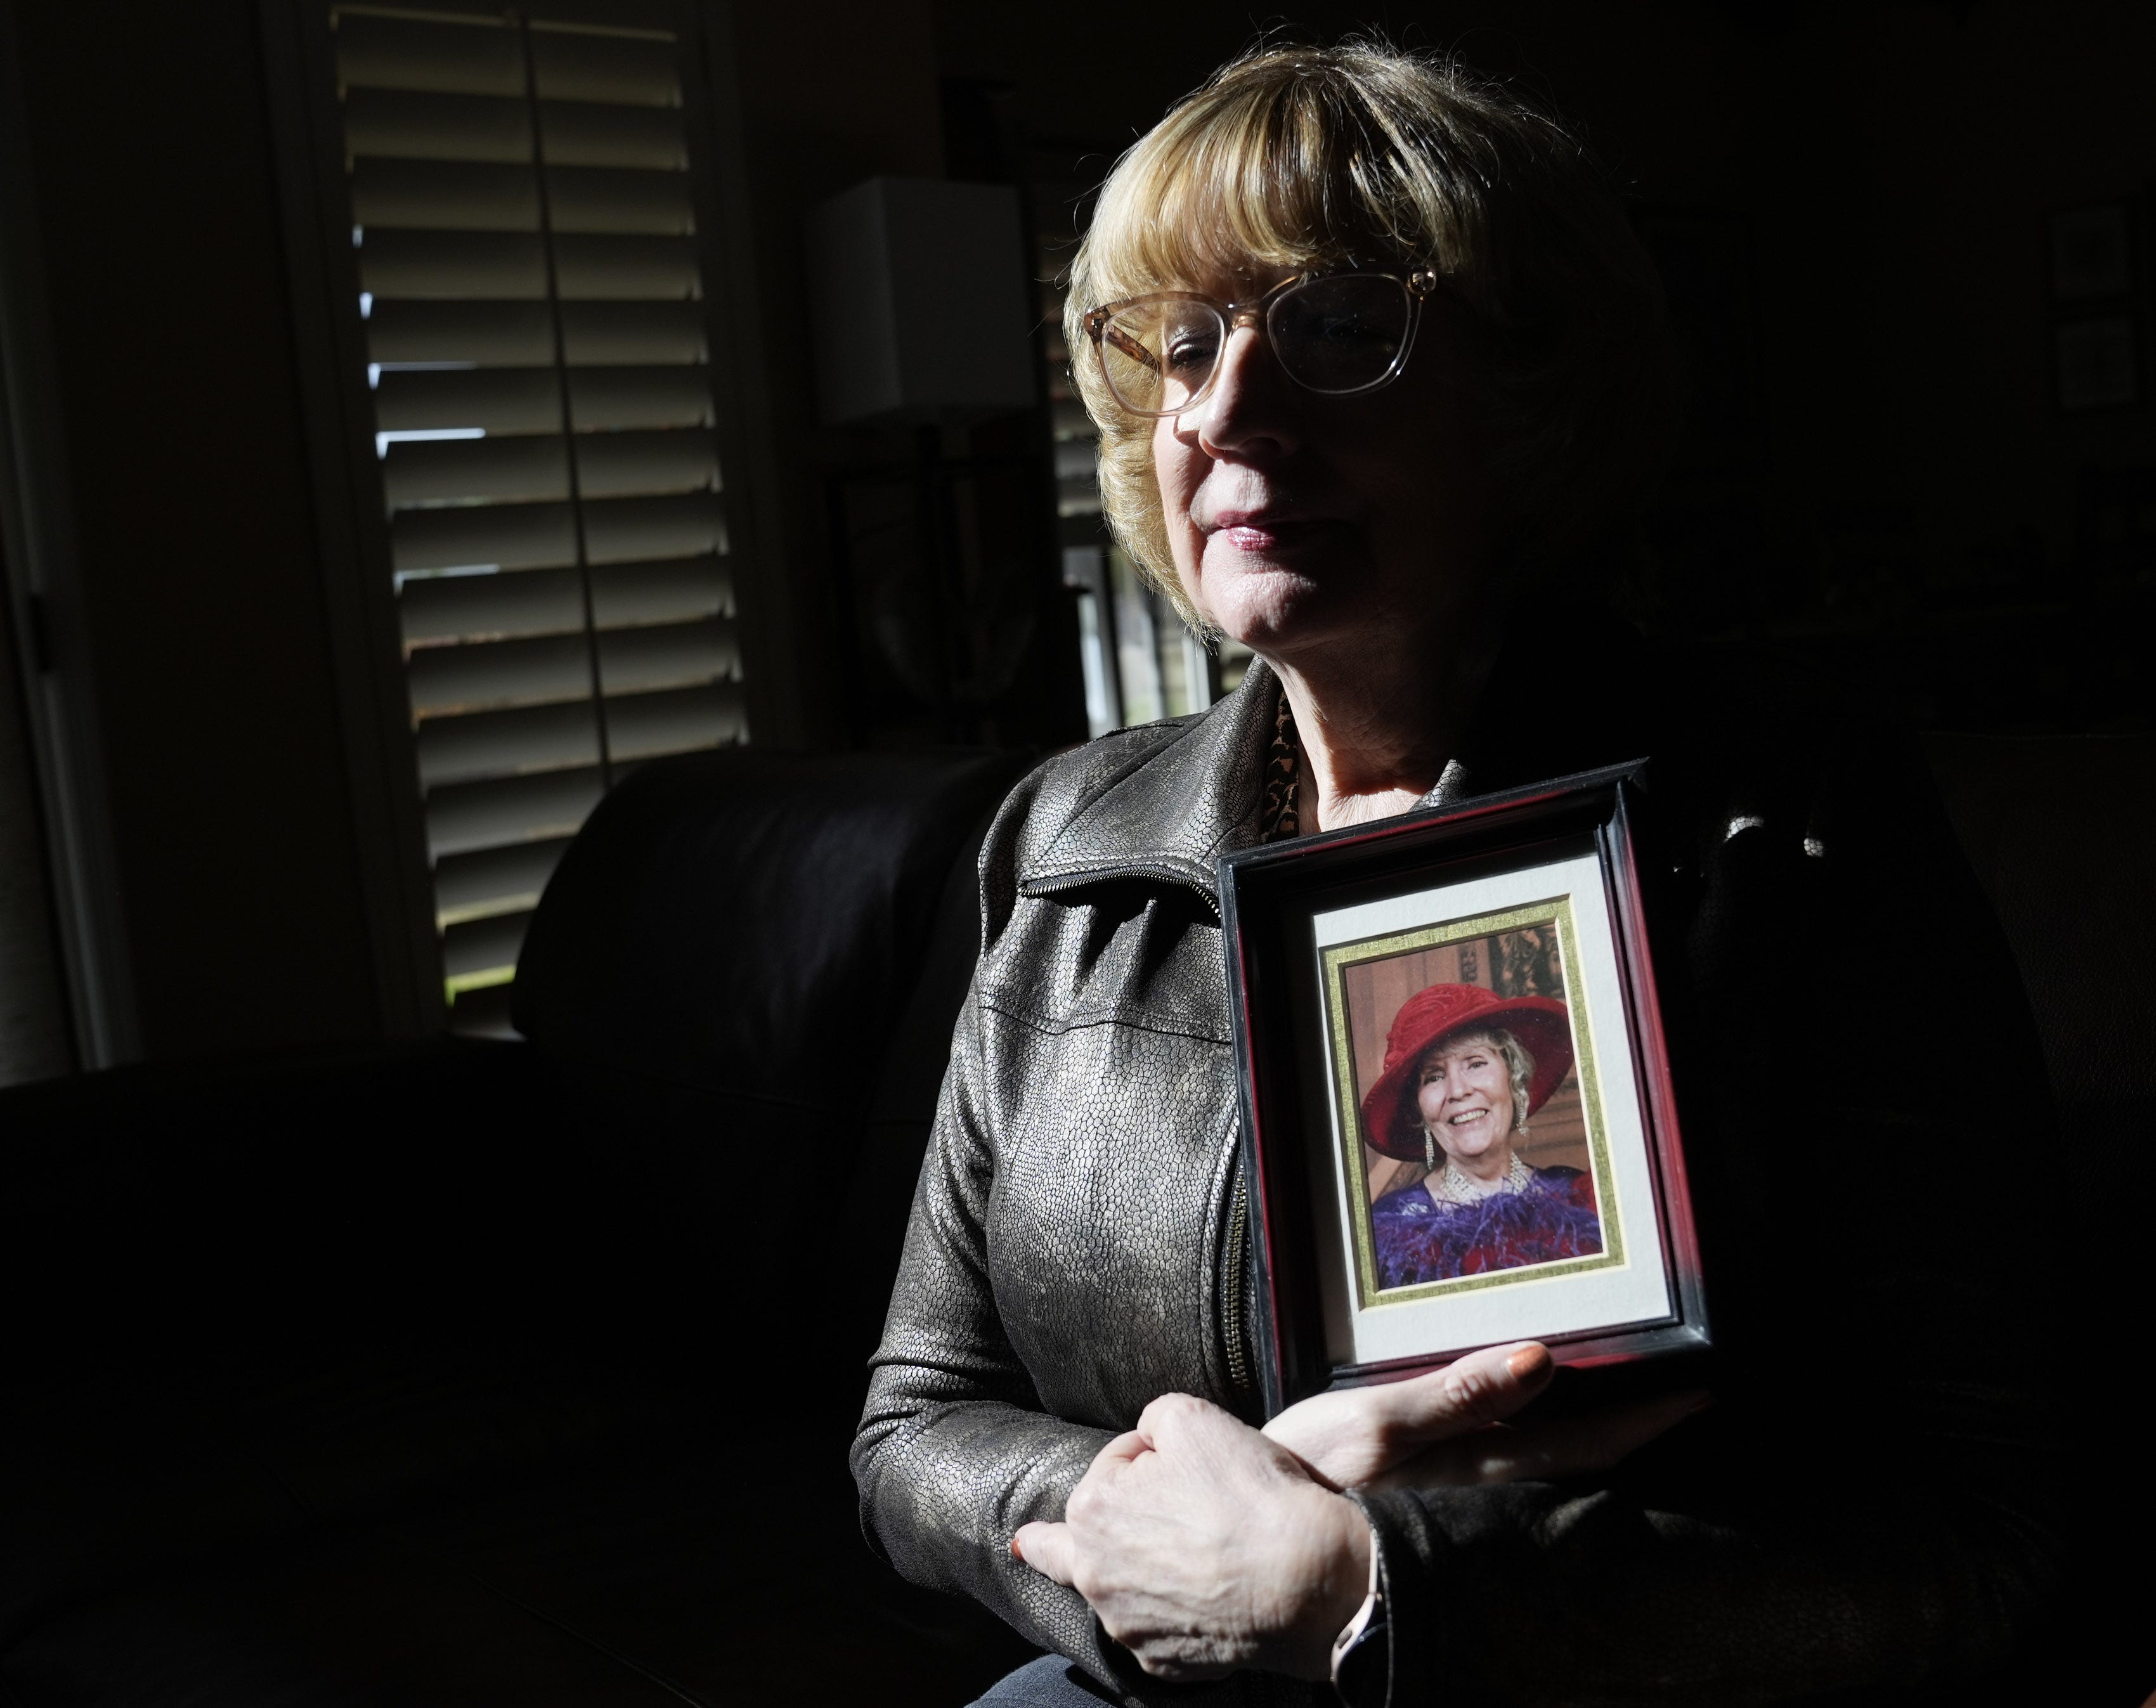 Cathy McDavid's mother, Joann Thompson, was beaten to death by another resident at her north Phoenix assisted living facility in 2021.